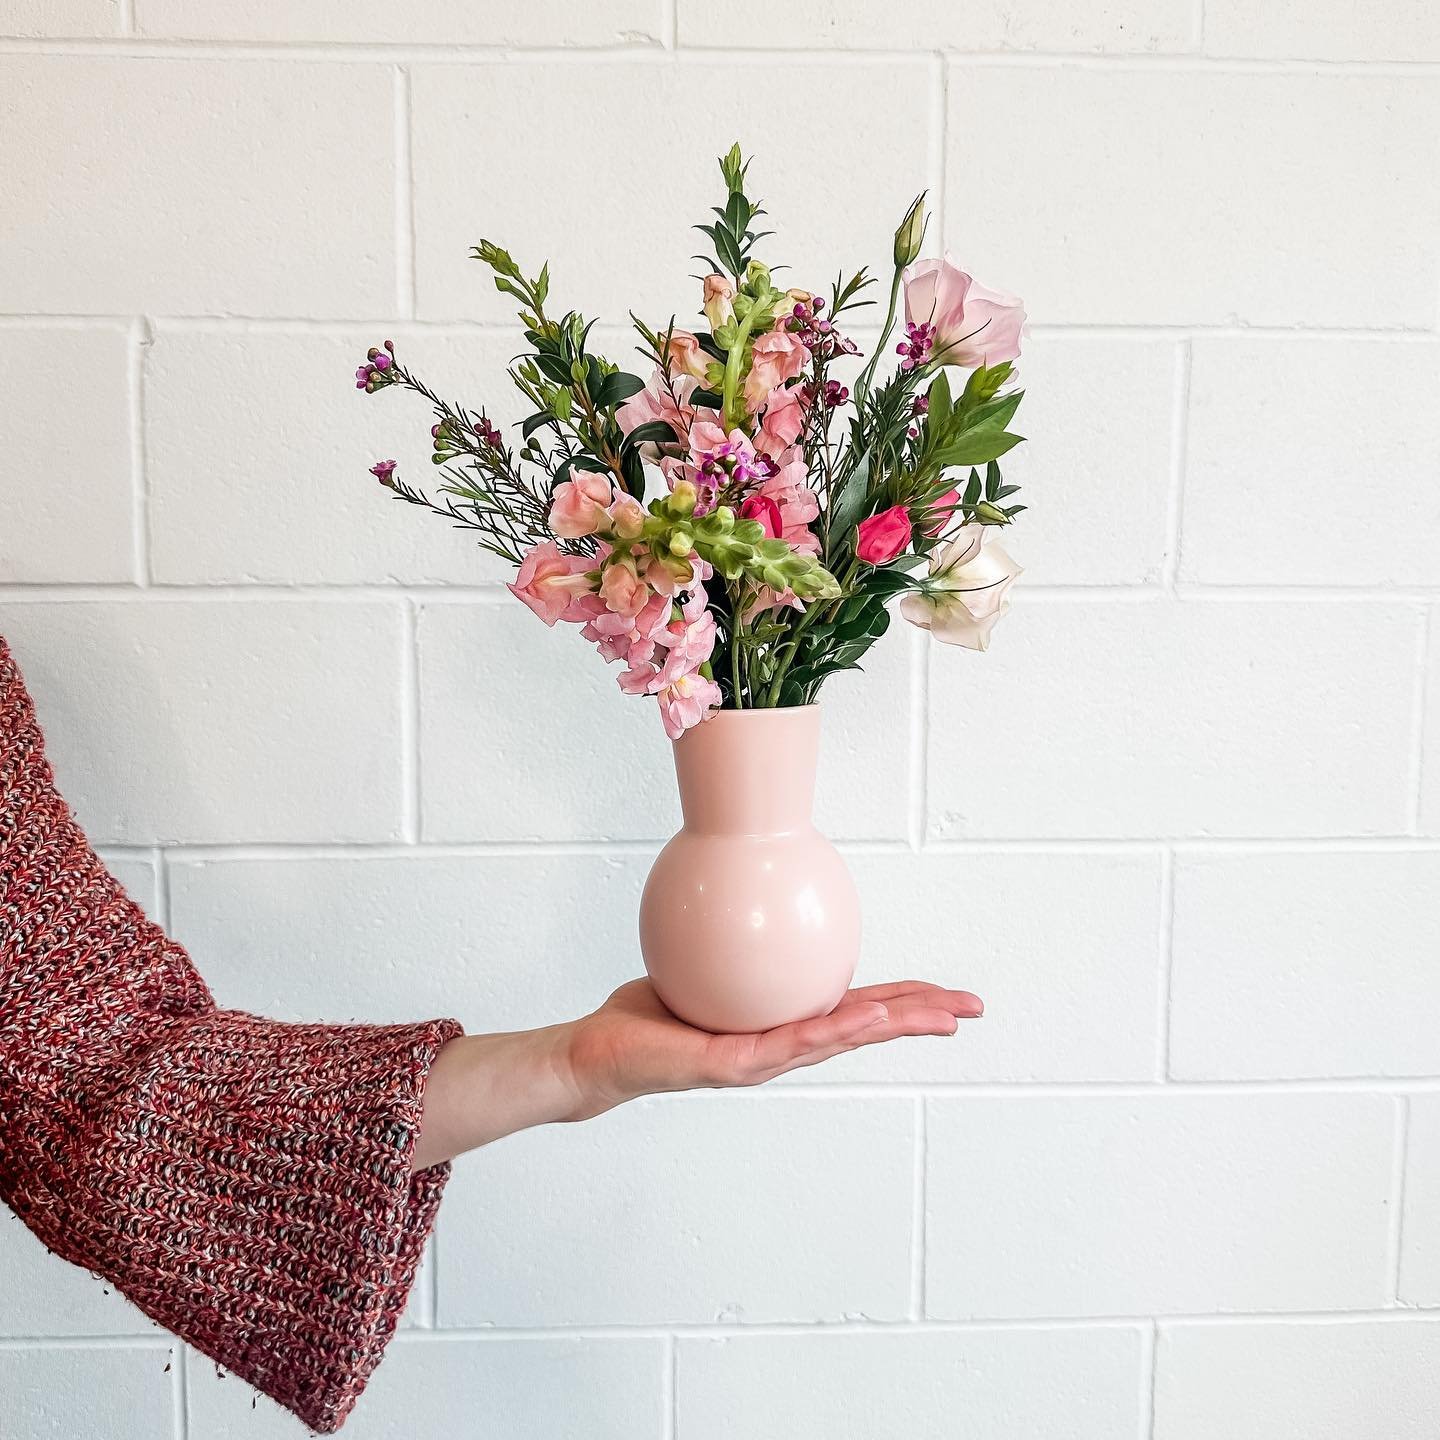 Don&rsquo;t forget to get your last minute Mother&rsquo;s Day pre orders in!

Send the special women in your life flowers with a message 🌷🌸🌼

https://thebouquetbarbyjre.com/the-mobile-bar